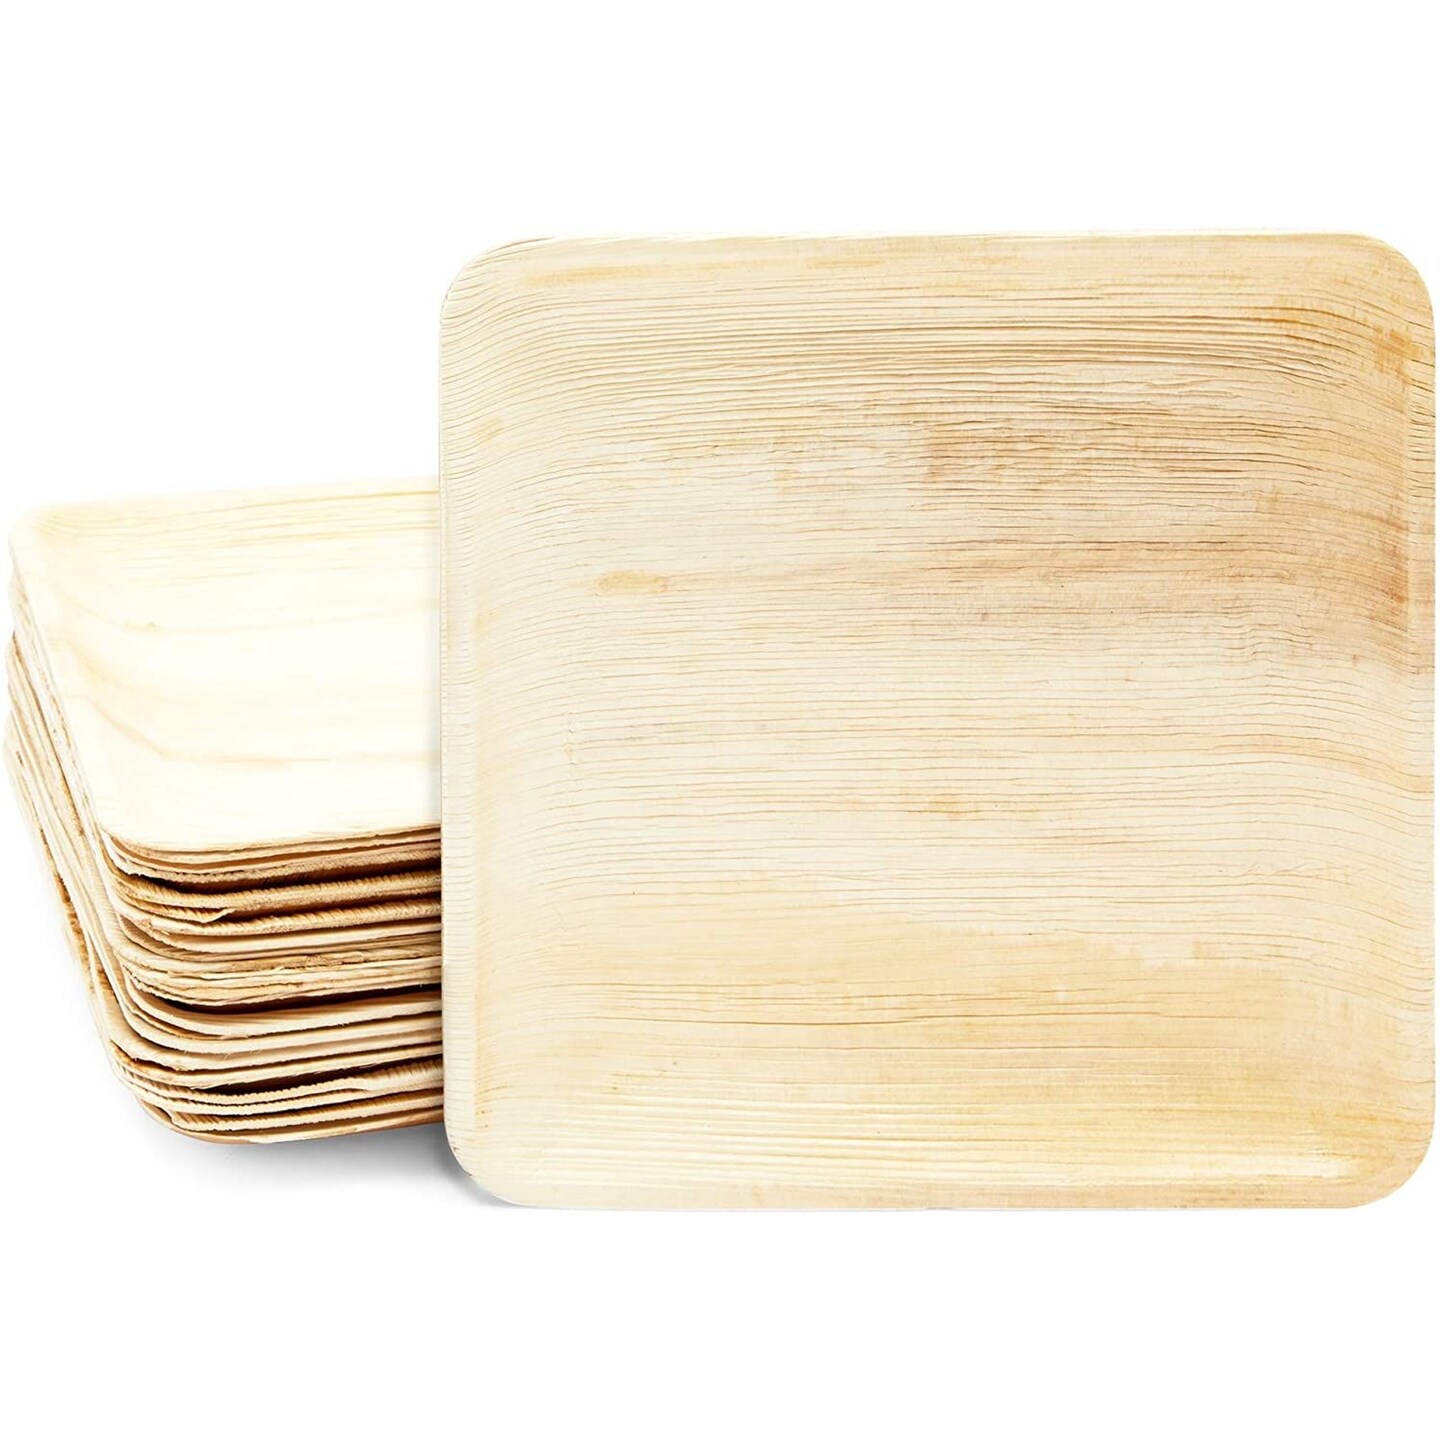 Square Areca Palm Leaf Plates, Single-Use Party Dinnerware (10 In, 24 Pack)